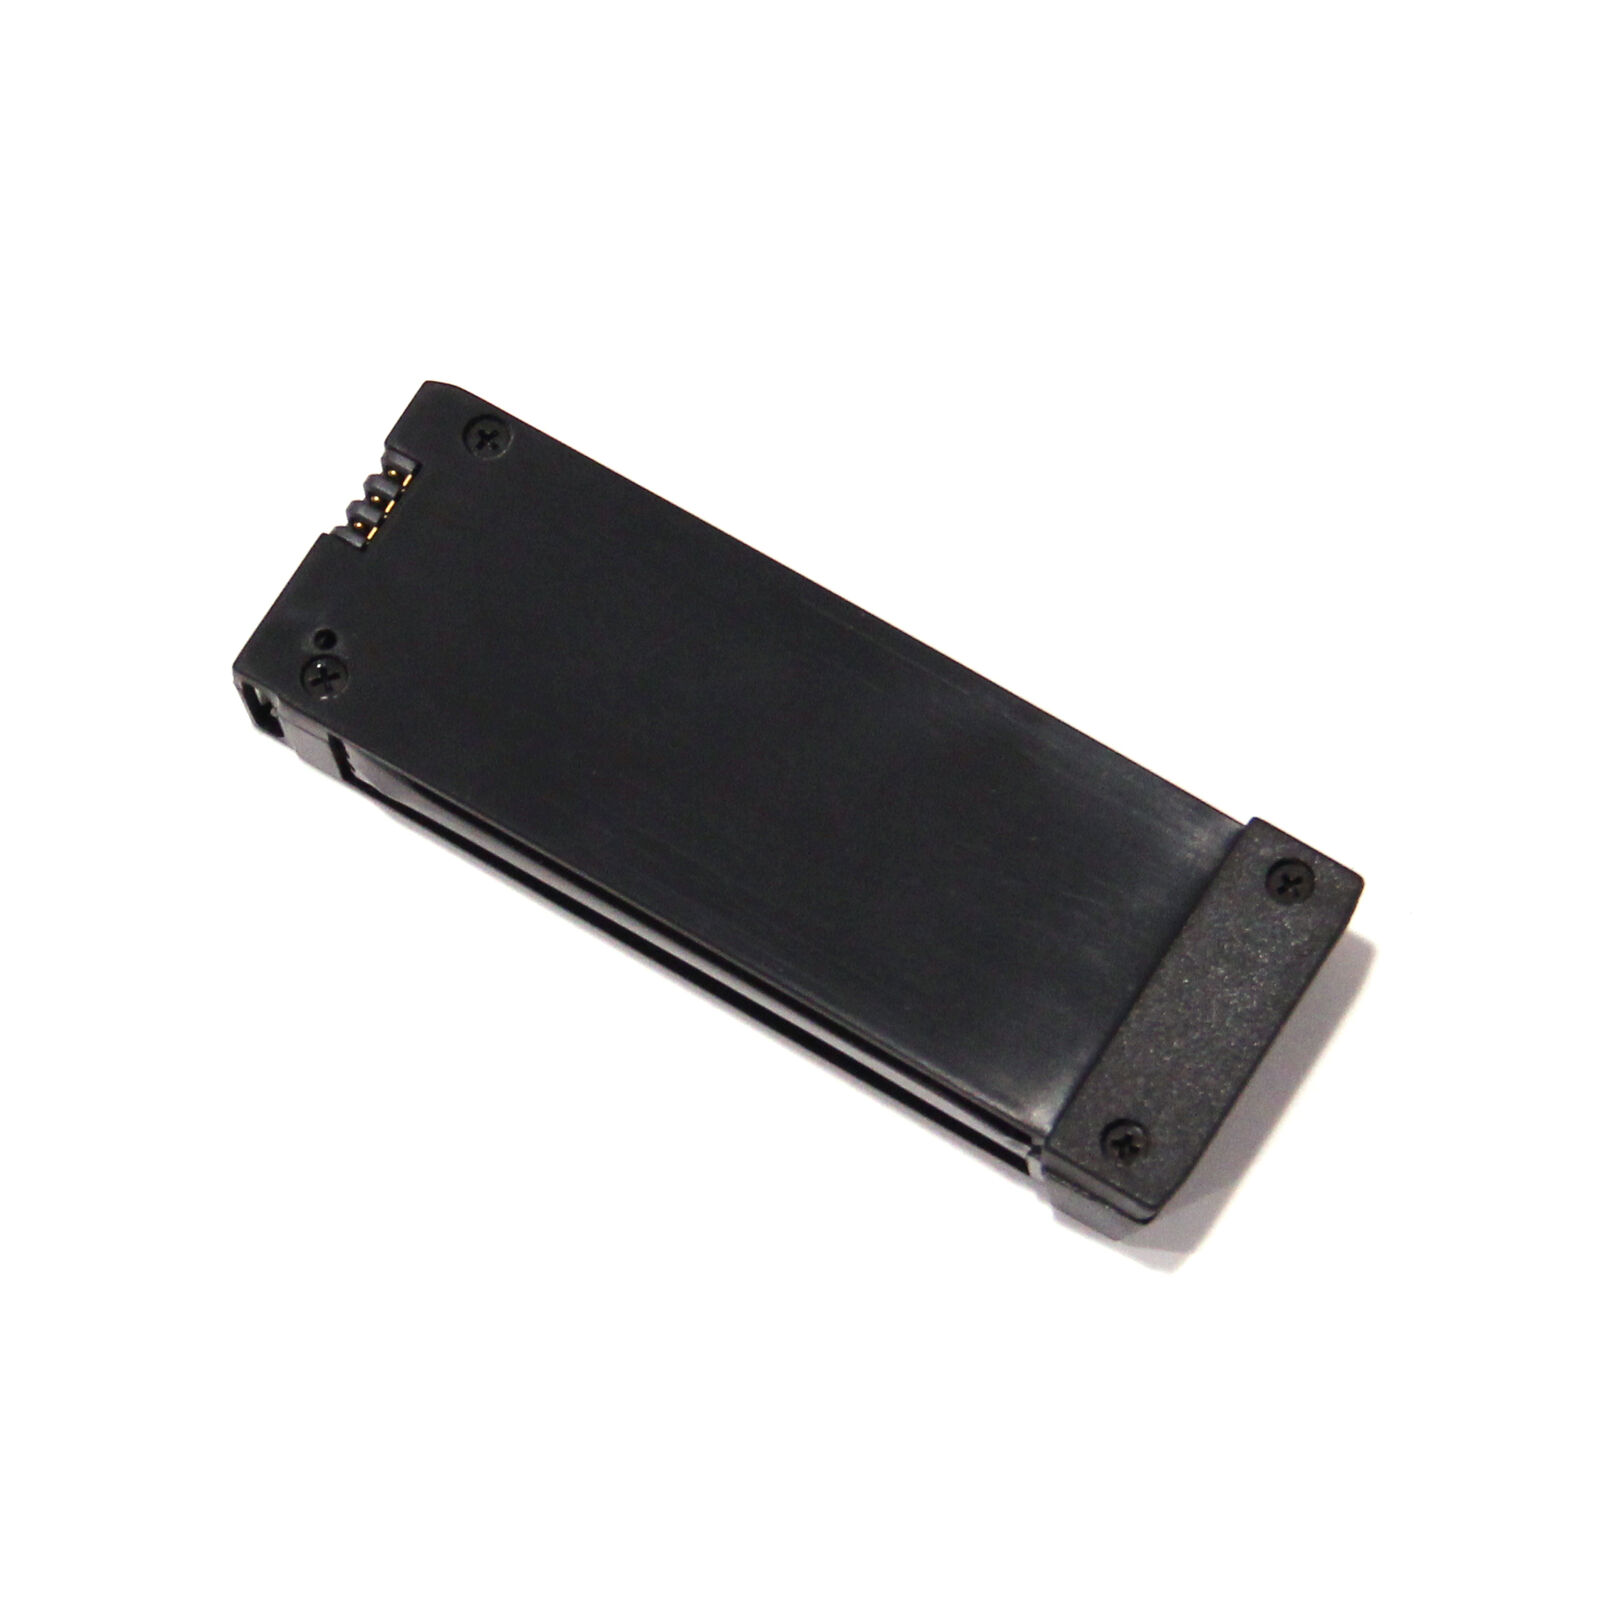 1200mAh Battery Replacement for Drone Quadcopter